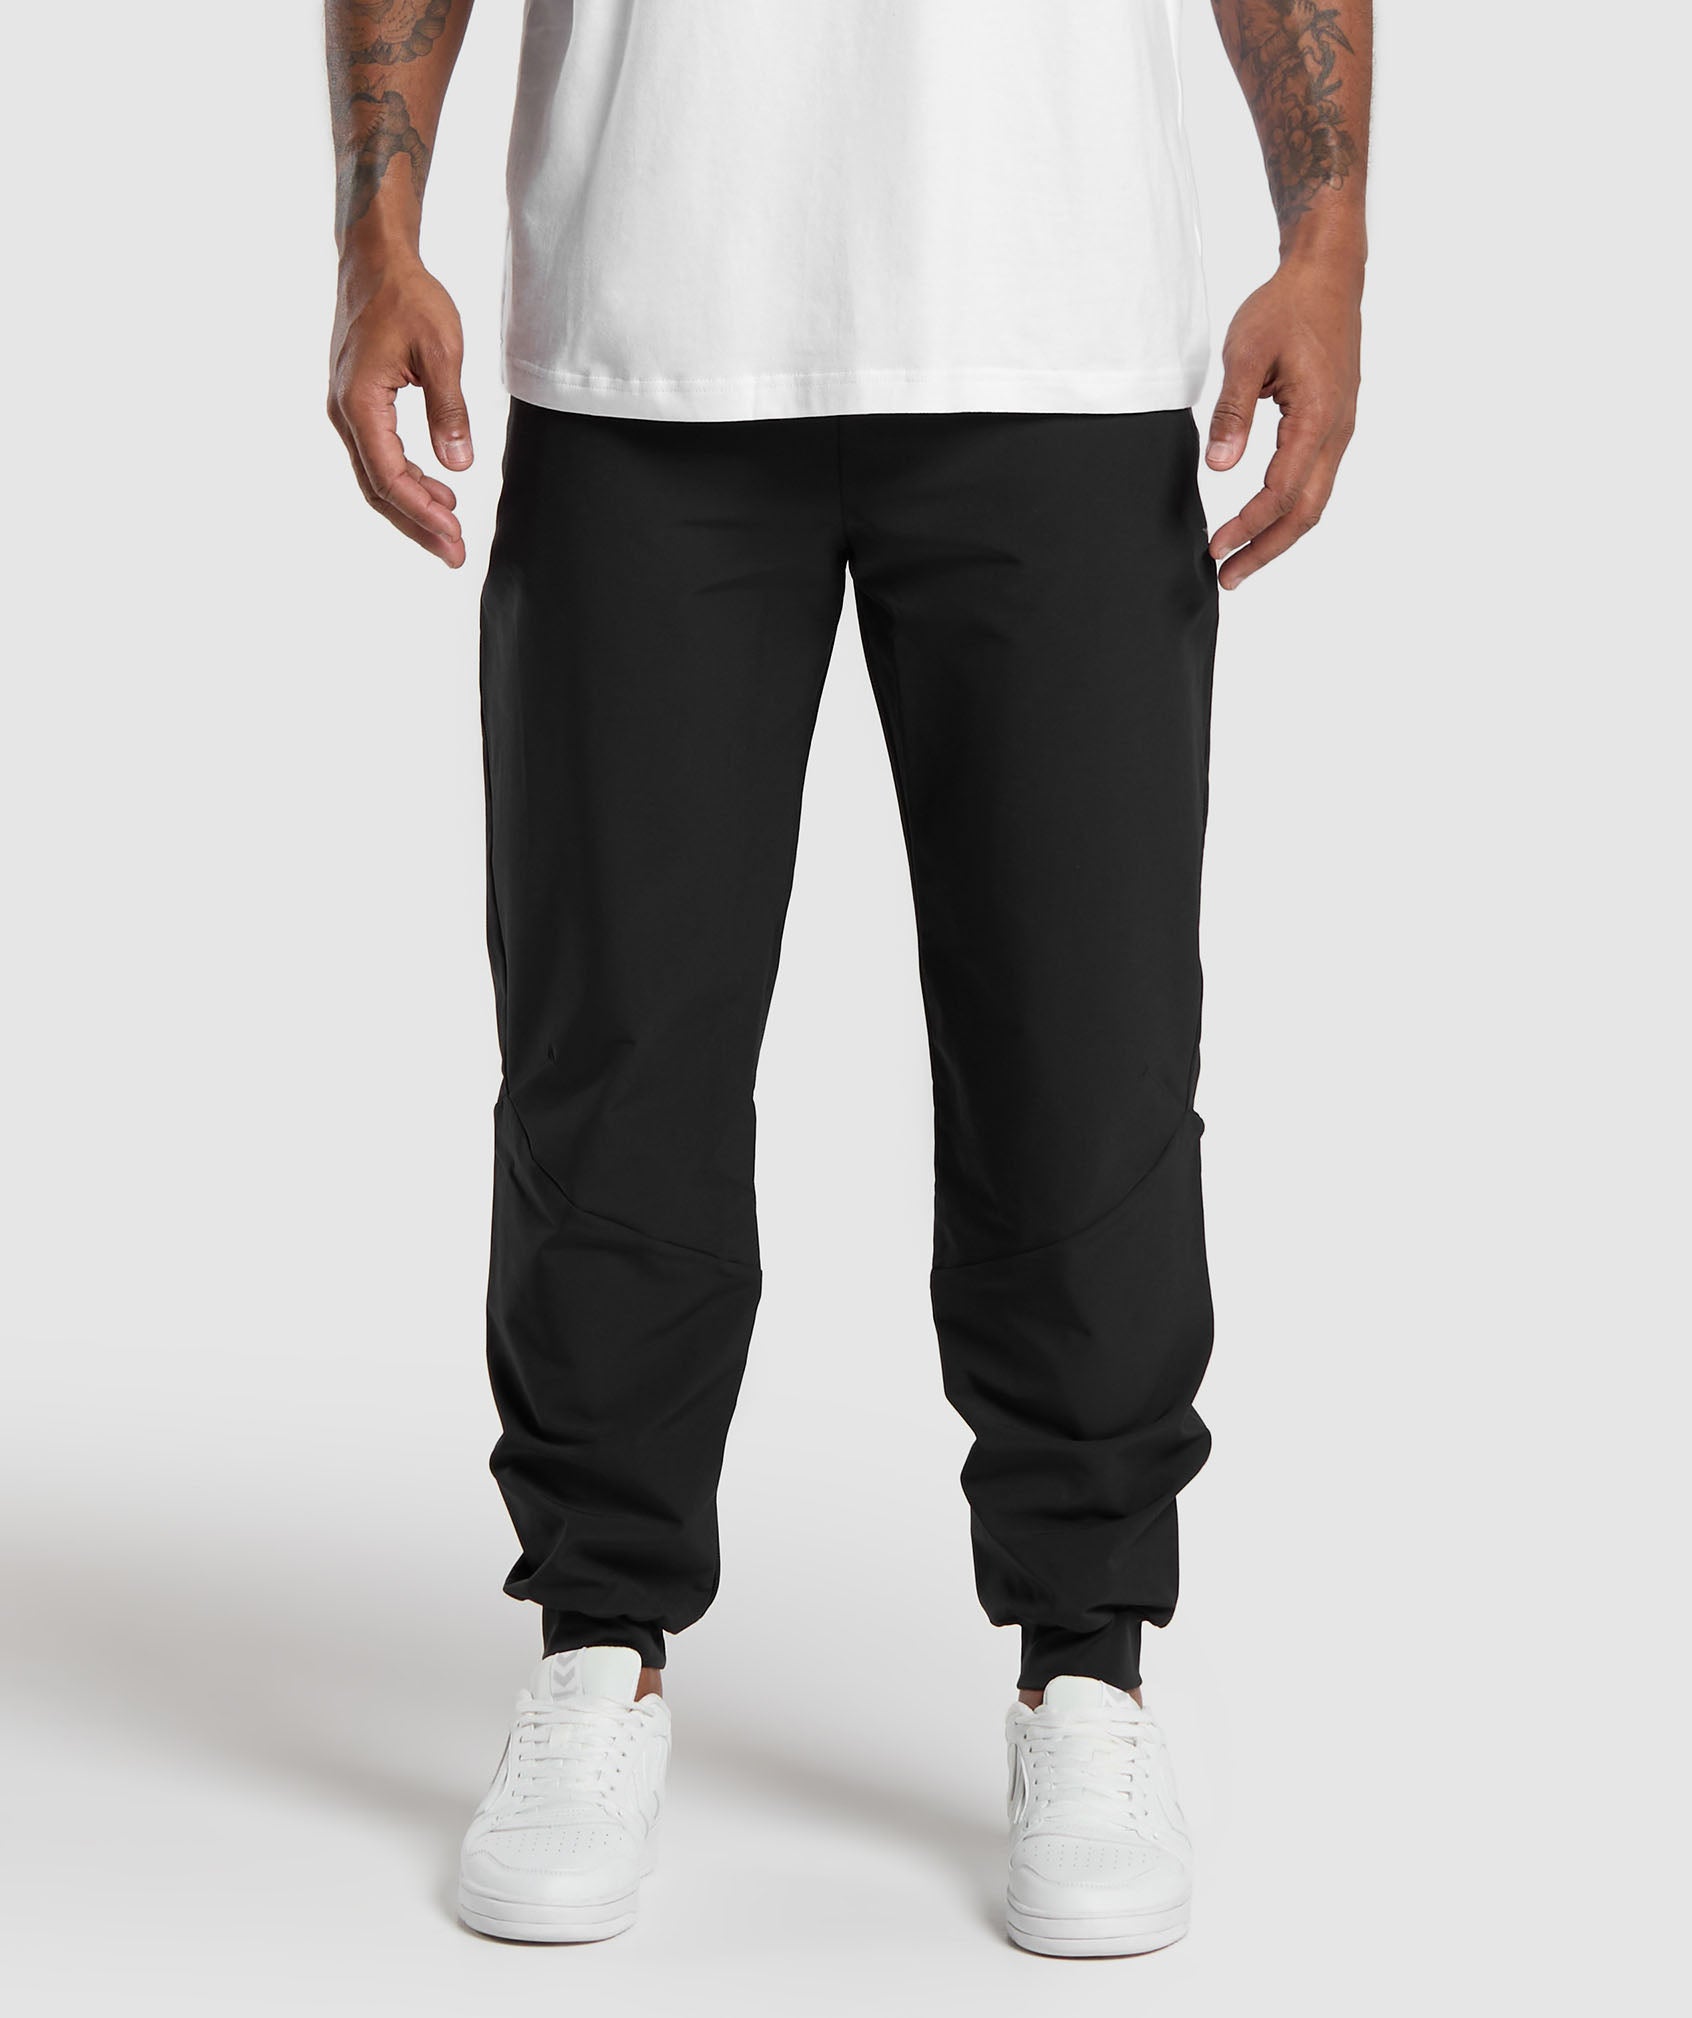 Ease Woven Joggers in Black